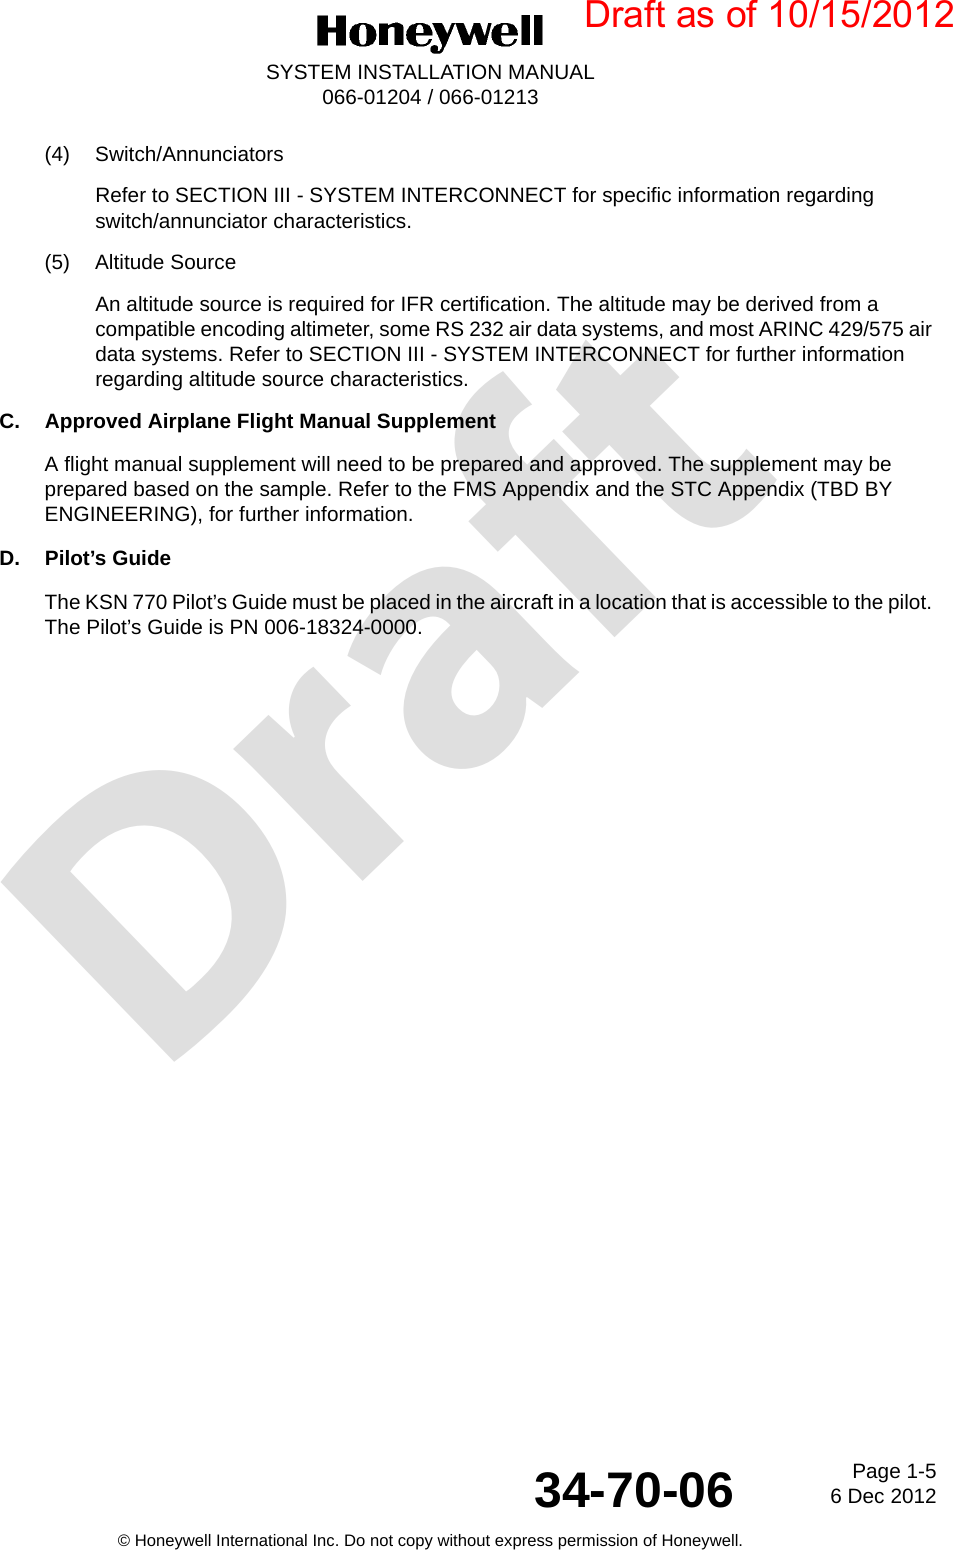 DraftPage 1-56 Dec 201234-70-06SYSTEM INSTALLATION MANUAL066-01204 / 066-01213© Honeywell International Inc. Do not copy without express permission of Honeywell.(4) Switch/AnnunciatorsRefer to SECTION III - SYSTEM INTERCONNECT for specific information regarding switch/annunciator characteristics.(5) Altitude SourceAn altitude source is required for IFR certification. The altitude may be derived from a compatible encoding altimeter, some RS 232 air data systems, and most ARINC 429/575 air data systems. Refer to SECTION III - SYSTEM INTERCONNECT for further information regarding altitude source characteristics.C. Approved Airplane Flight Manual SupplementA flight manual supplement will need to be prepared and approved. The supplement may be prepared based on the sample. Refer to the FMS Appendix and the STC Appendix (TBD BY ENGINEERING), for further information.D. Pilot’s GuideThe KSN 770 Pilot’s Guide must be placed in the aircraft in a location that is accessible to the pilot. The Pilot’s Guide is PN 006-18324-0000.Draft as of 10/15/2012